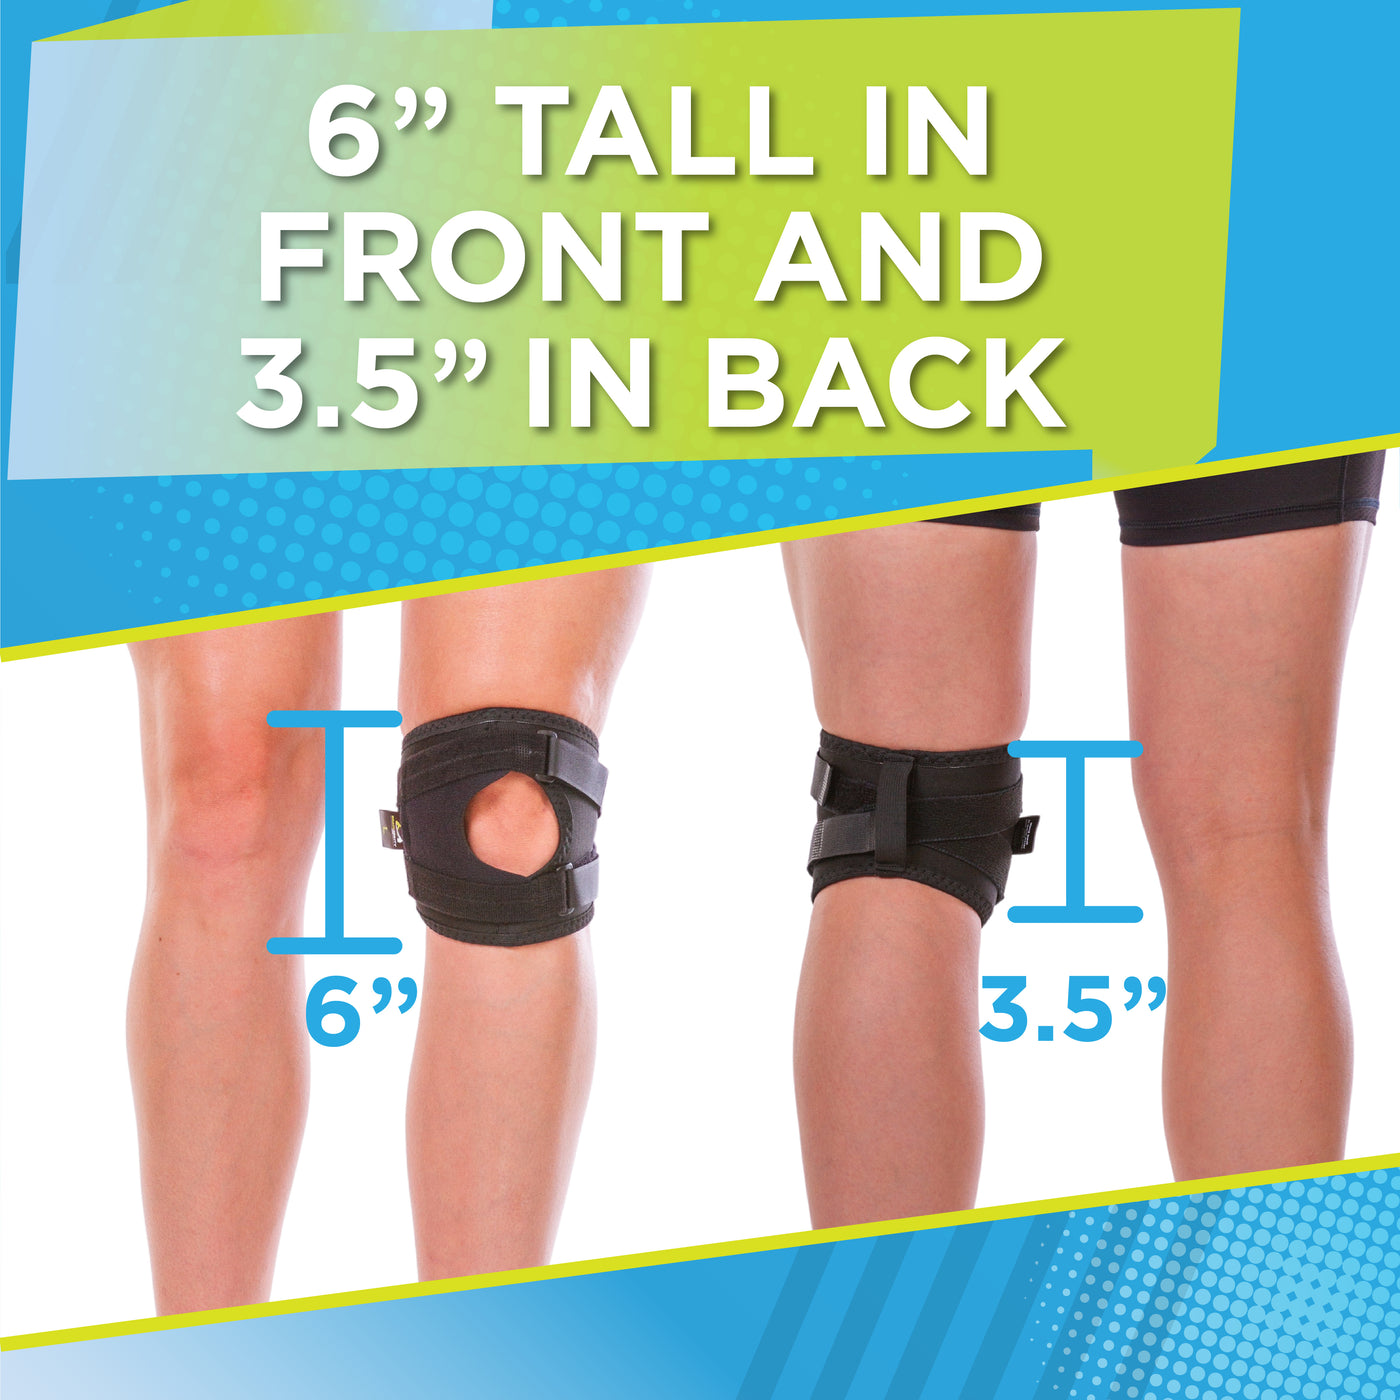 The short kneecap dislocation and subluxation is 6 inches tall in the front